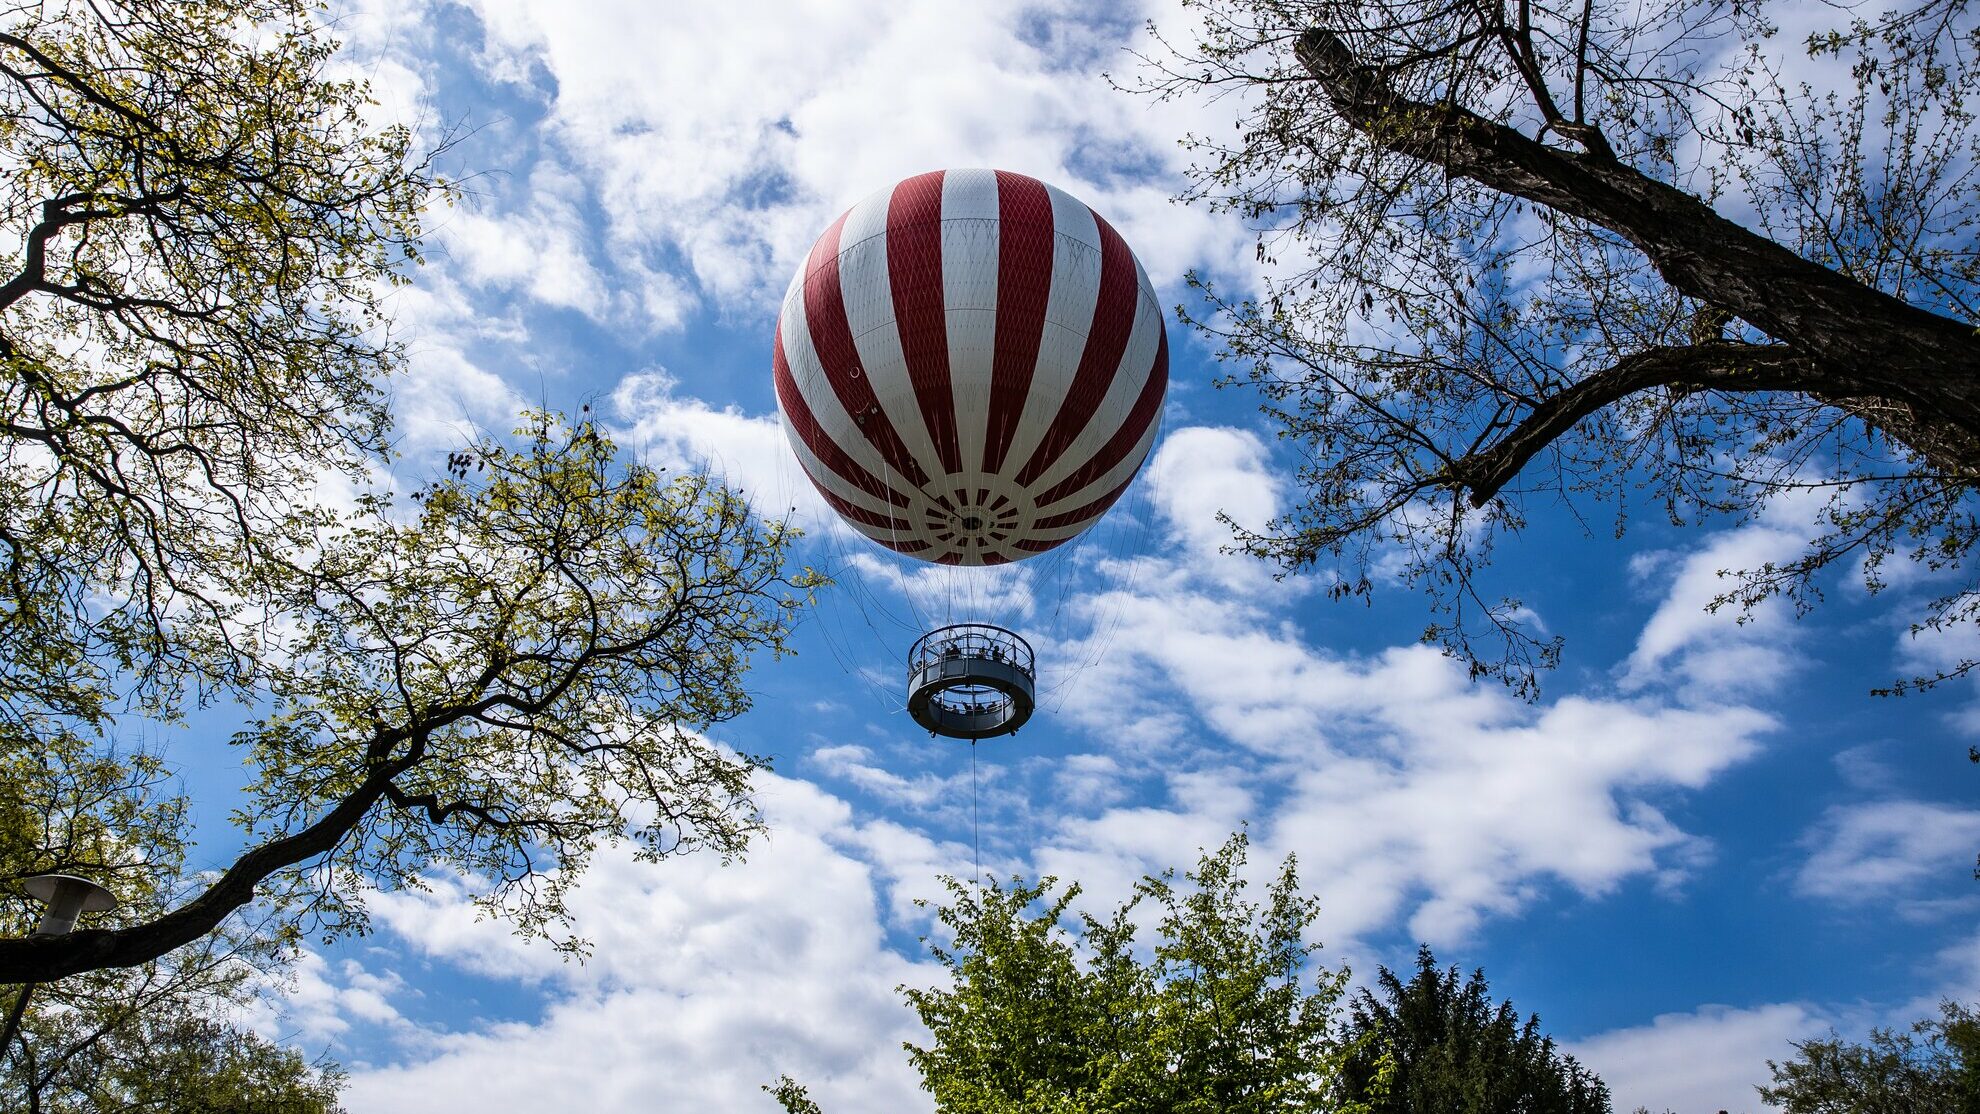 Red-and-white hot air balloon ride in the Budapest City Park